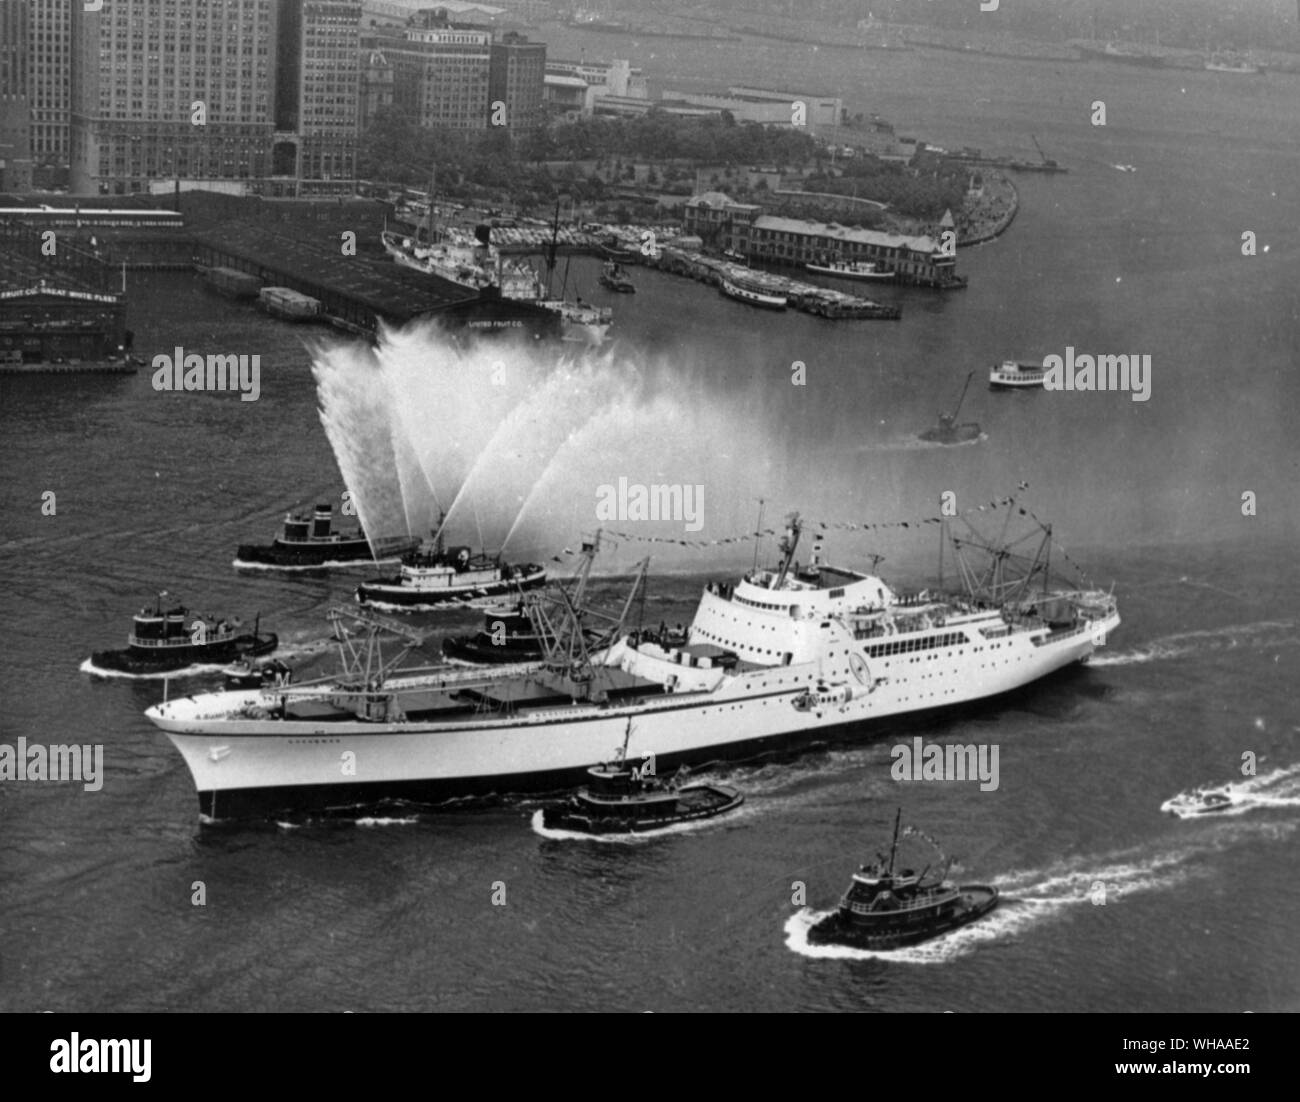 Enthusiastic New York reception for nuclear ship Savannah. Escorted by a flotilla of tugs, small craft and fireboats spouting their traditional greetings, the nuclear ship Savannah moves up the Hudson River in the Port of New York.. Stock Photo